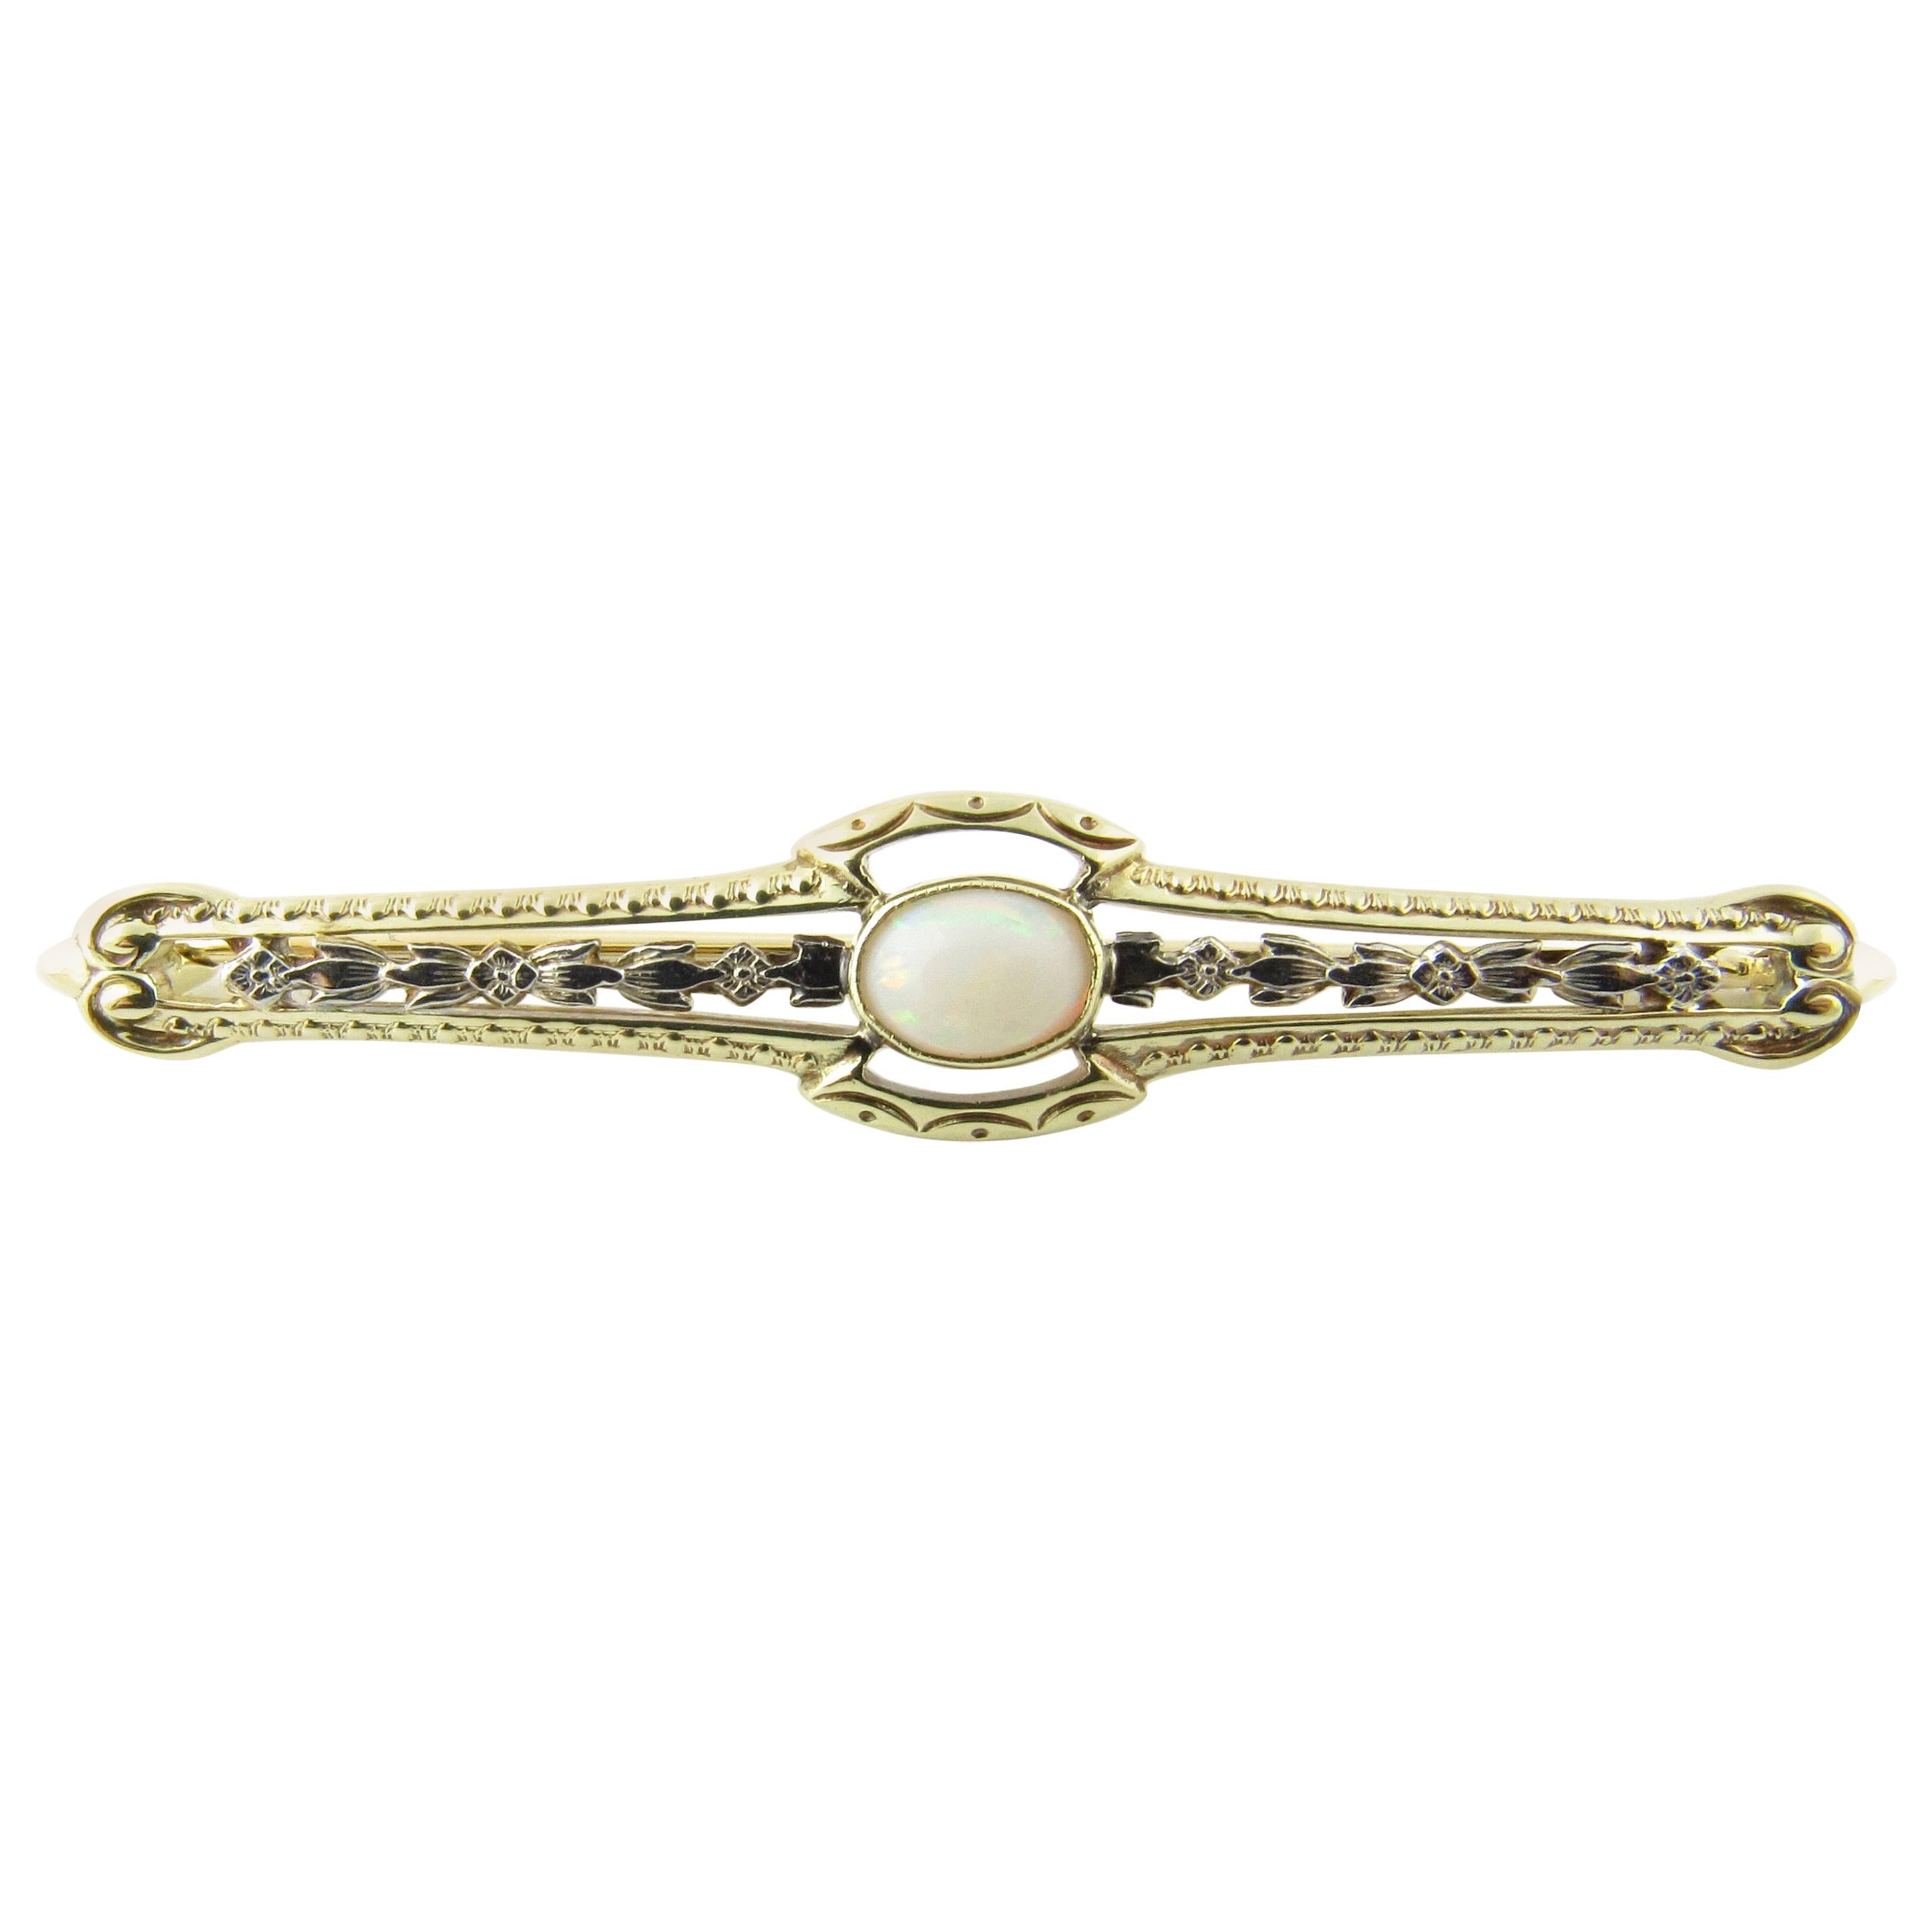 14 Karat White/Yellow Gold and Opal Pin or Brooch